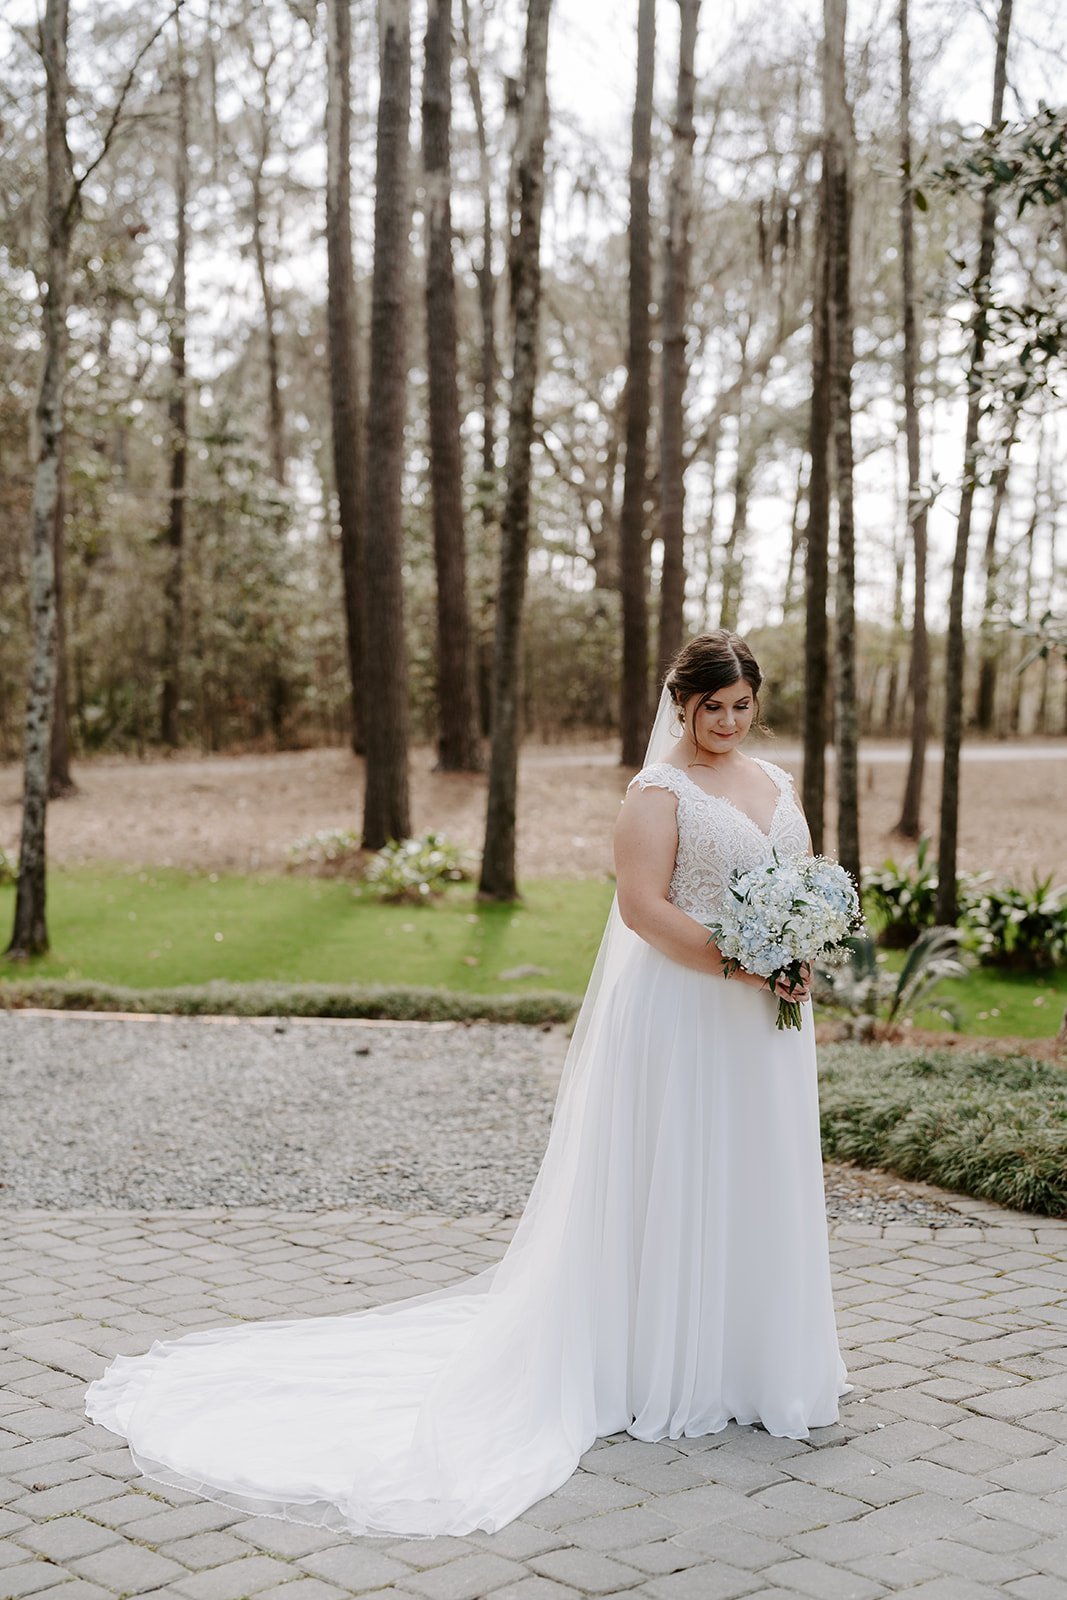 real-savanna-bride-in-the-june-wedding-gown-by-maggie-sottero-purchased-from-savannah-bridal-shop-ivory-and-beau-savannah-bridal-boutique-savannah-wedding-gowns-savannah-wedding-dresses-5.jpg